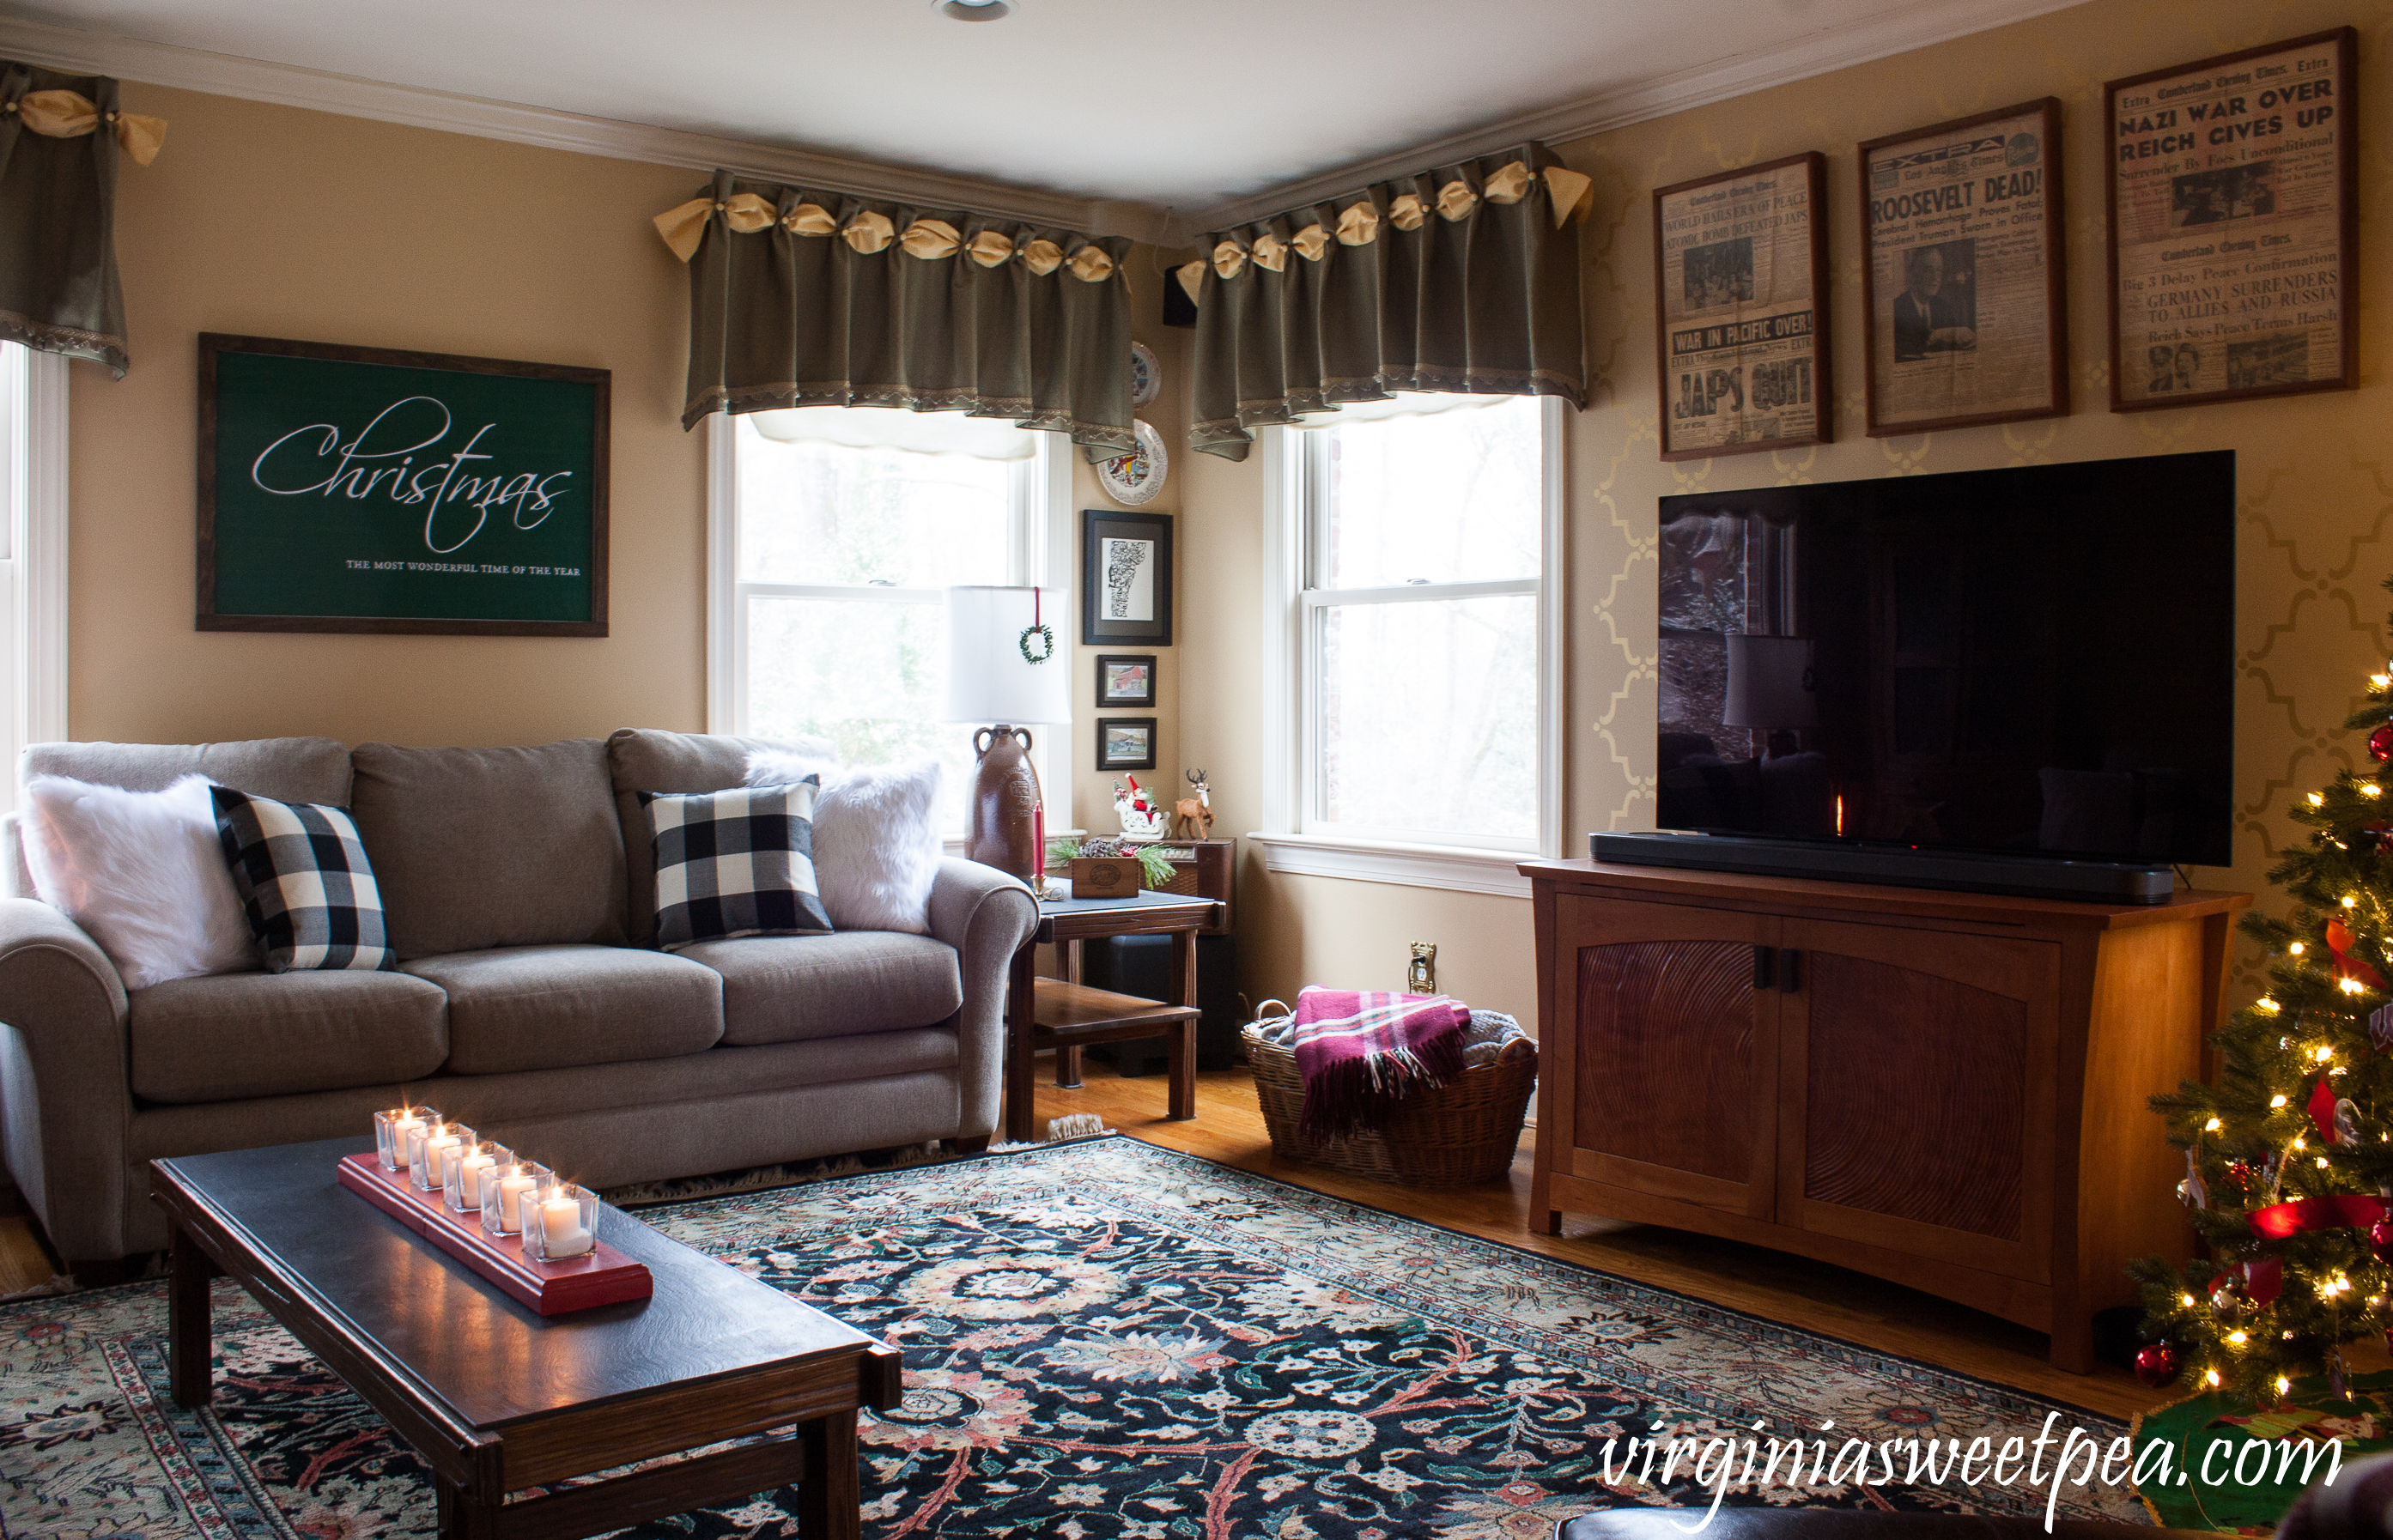 Christmas in the Family Room - A family room decorated for Christmas. #christmas #christmasdecor #christmasdecorating 